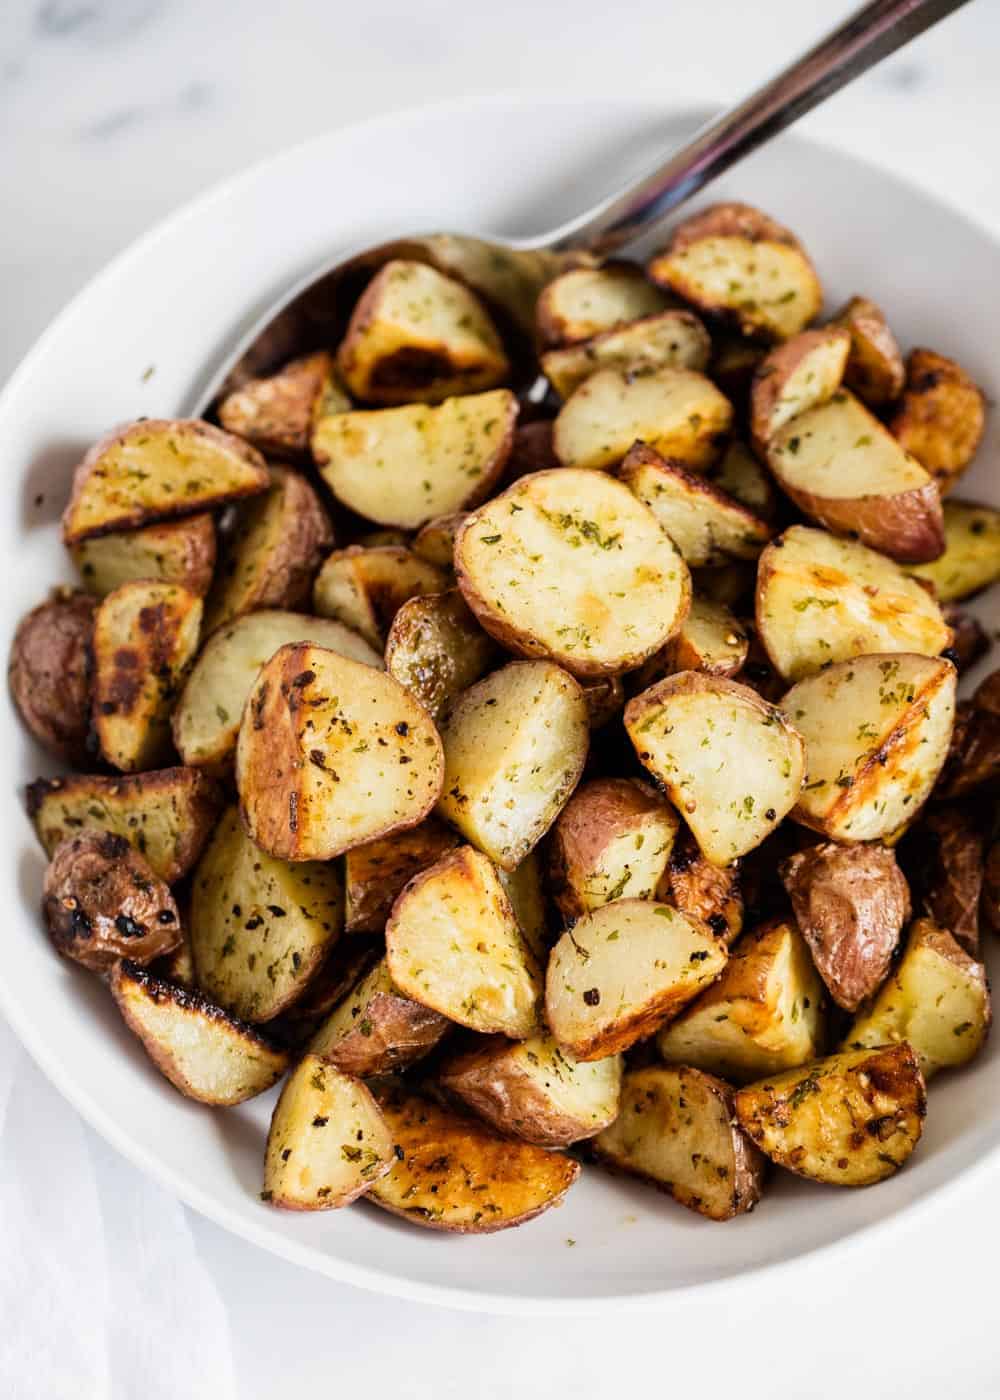 Roasted red potatoes in bowl with spoon.